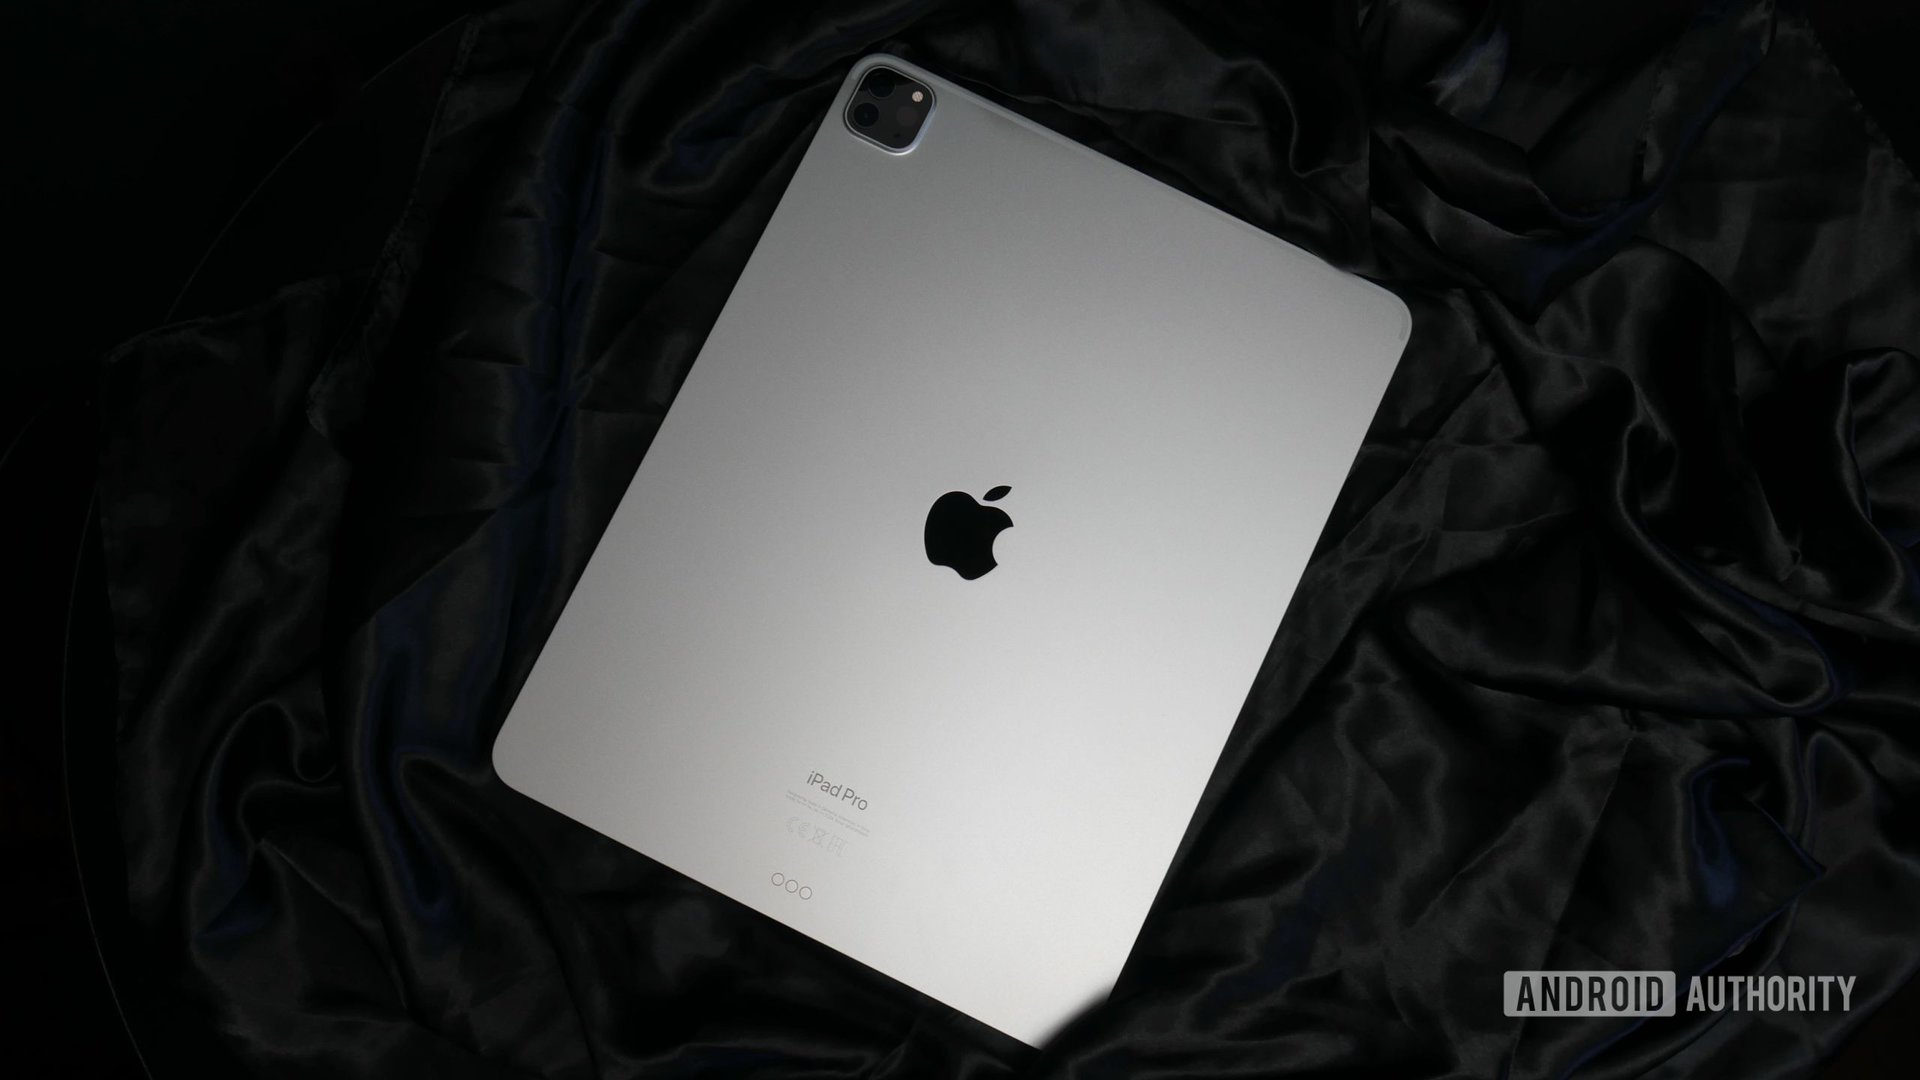 Apple iPad Air 2022: Price, Release Date, Features